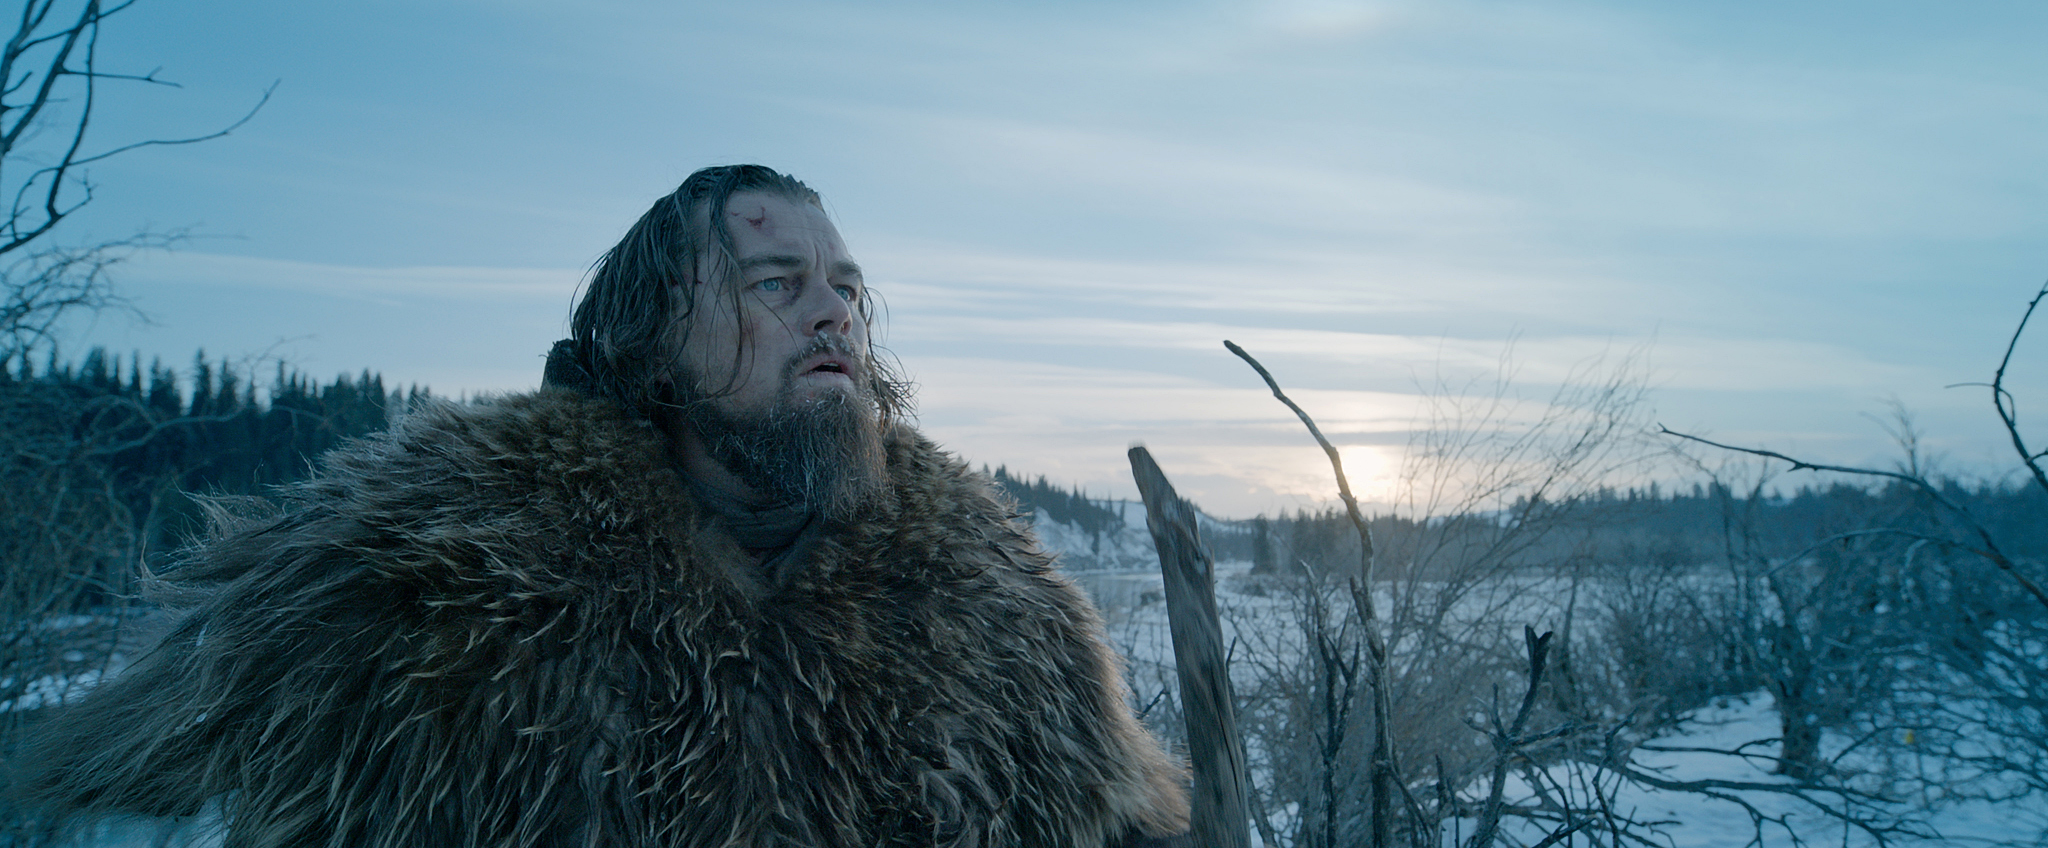 re_select_3.00001914 Leonardo DiCaprio stars in THE REVENANT, an immersive and visceral cinematic experience capturing one man’s epic adventure of survival and the extraordinary power of the human spirit. Photo Credit: Courtesy Twentieth Century Fox. Copyright © 2015 Twentieth Century Fox Film Corporation. All rights reserved. THE REVENANT Motion Picture Copyright © 2015 Regency Entertainment (USA), Inc. and Monarchy Enterprises S.a.r.l. All rights reserved. Not for sale or duplication.